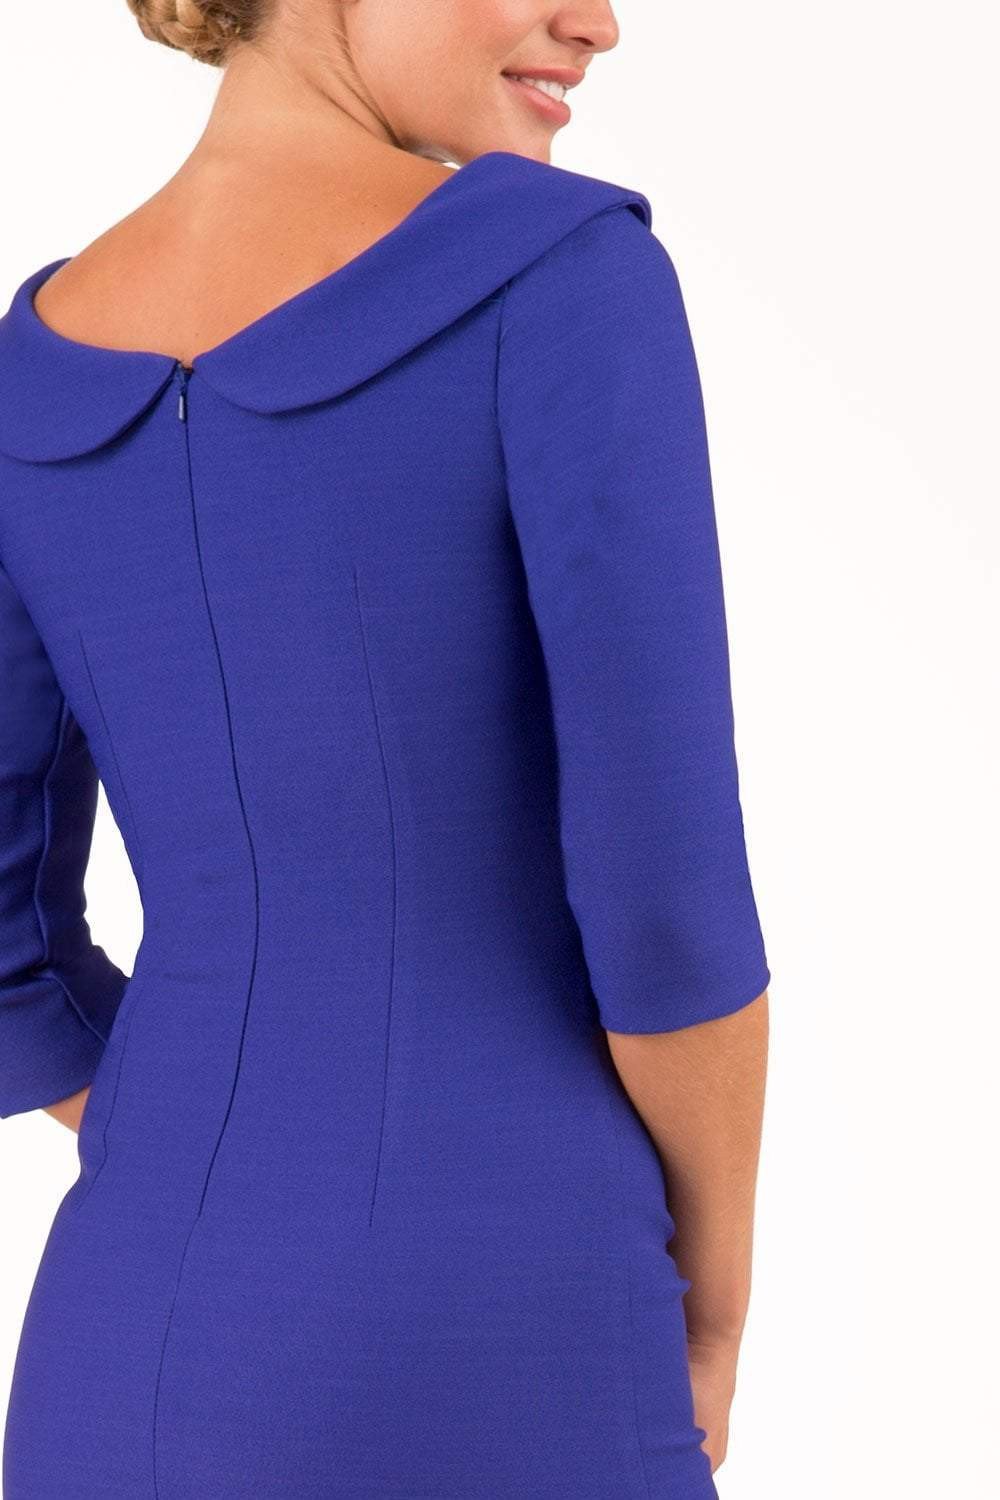 model is wearing diva catwalk seed axford pencil sleeved dress with rounded folded collar in palace blue back close up